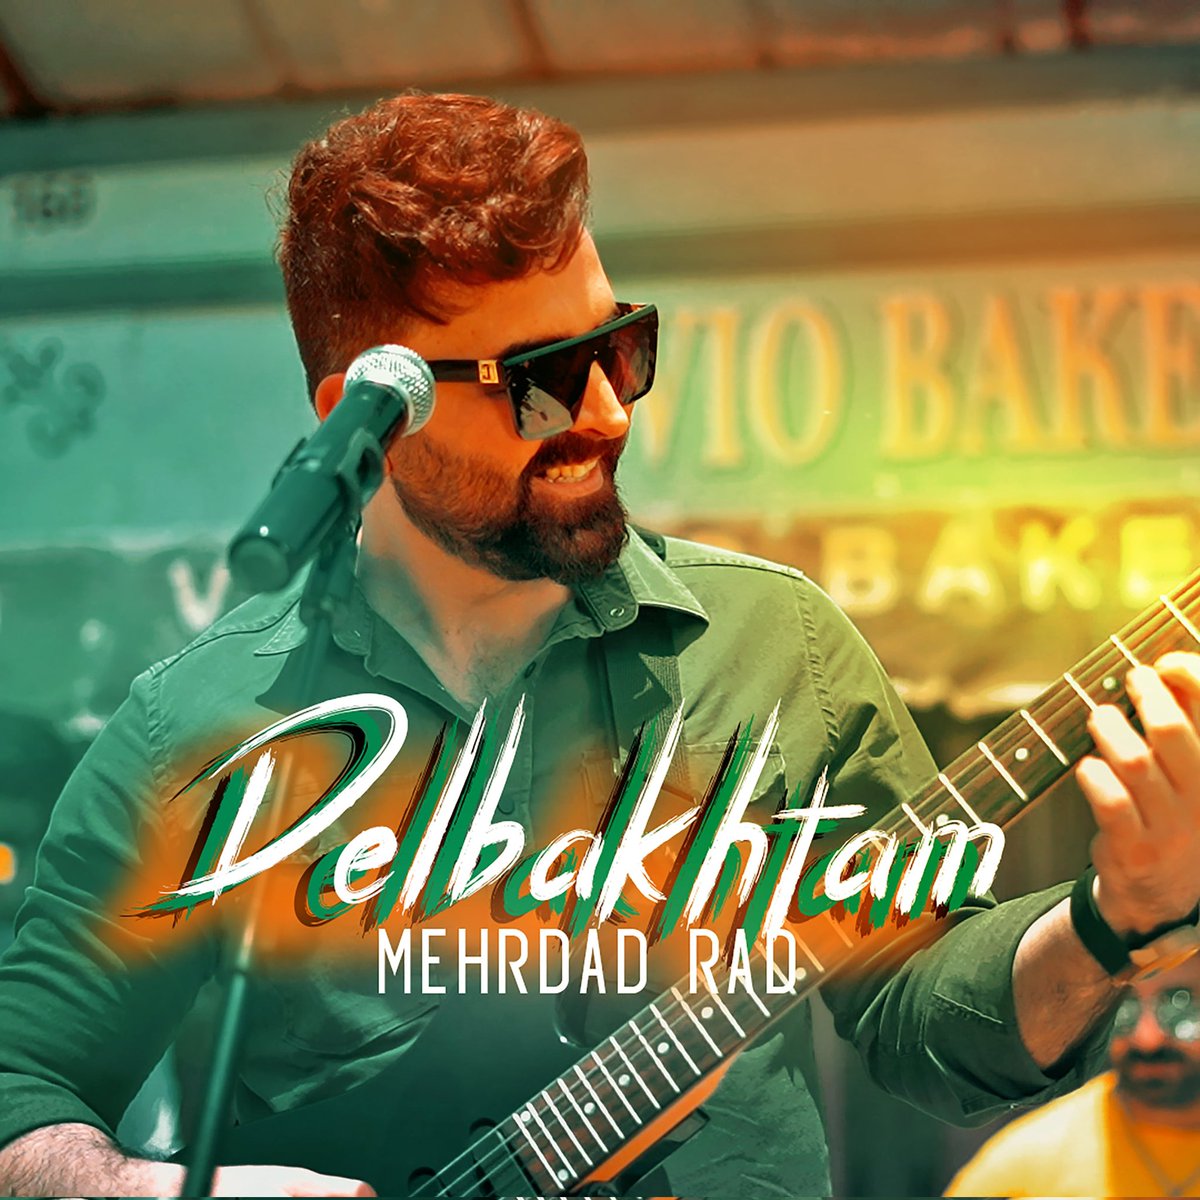 Now you can Listen to “Delbakhtam” by Mehrdad Rad on all platforms #billboard #spotify #limakrecords #smkrs #alwaysinthegame #dieslow #orejashiphop #bugs #bugsbunny #bugsbunnychallenge #jumpman23 #jumpman #street #swag #swagger #swaggy #swagstyle #nike #airjordan #jordan #retro1